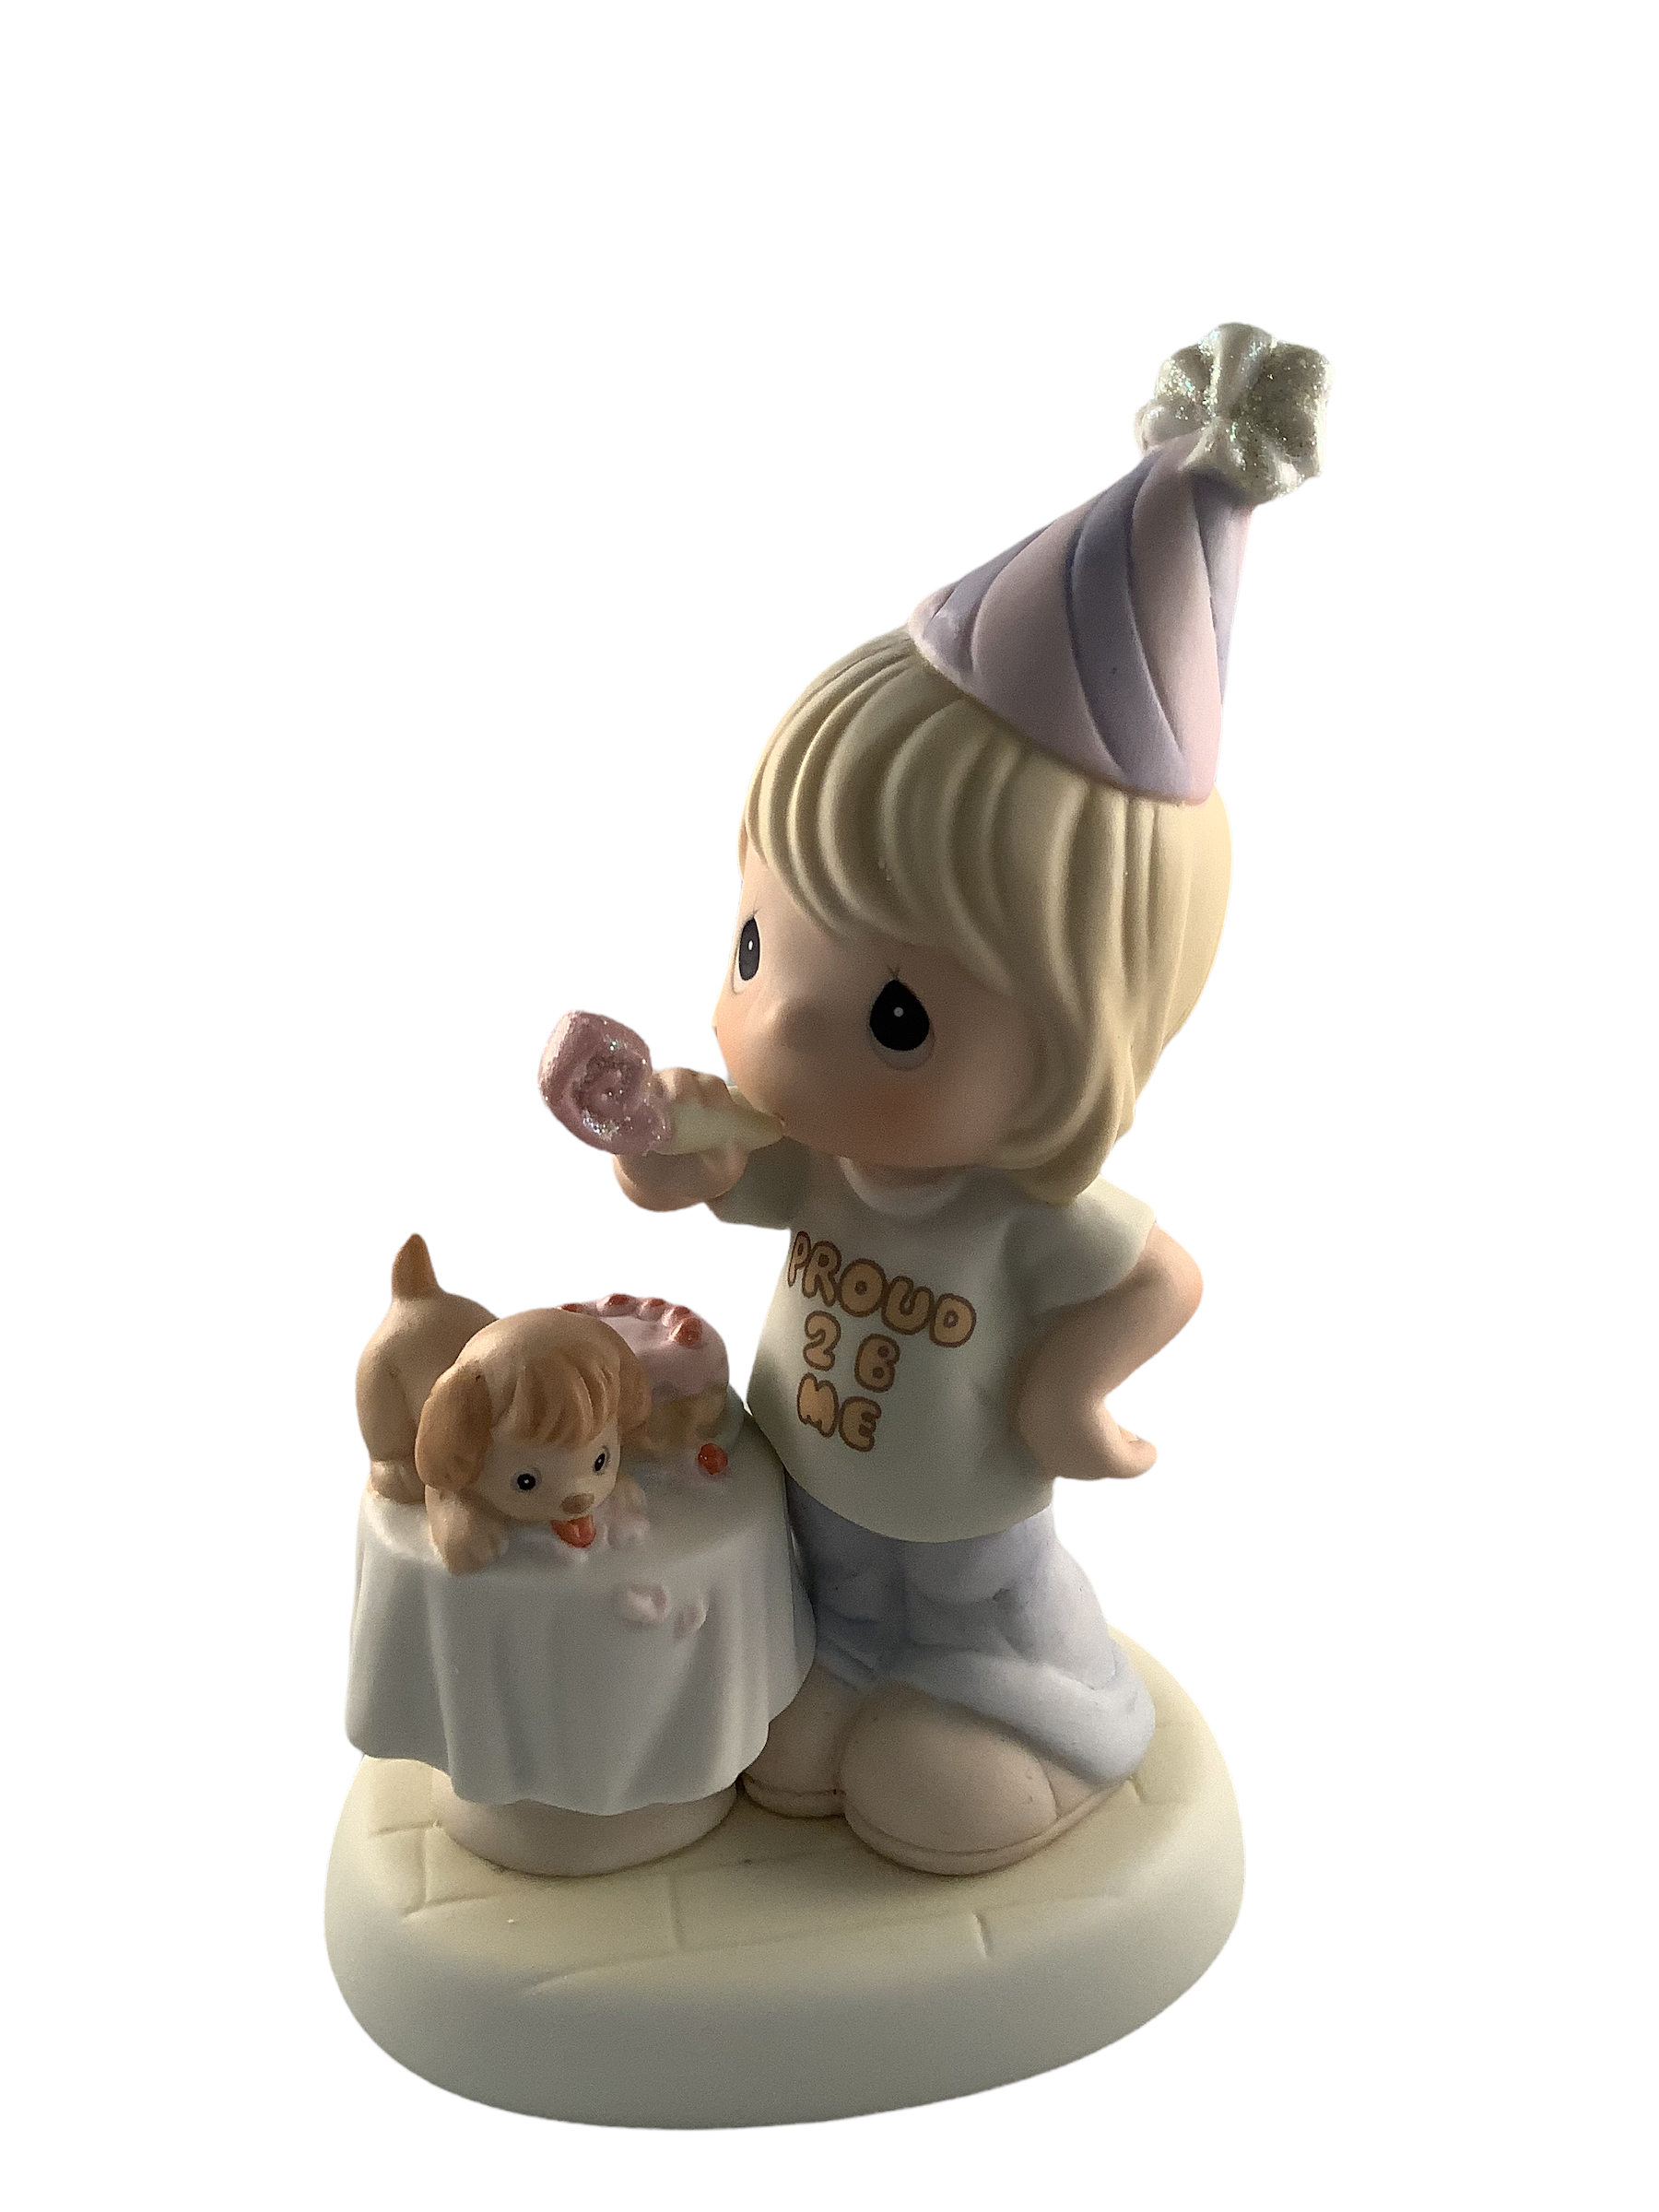 It's Time To Blow Your Own Horn - Precious Moment Figurine